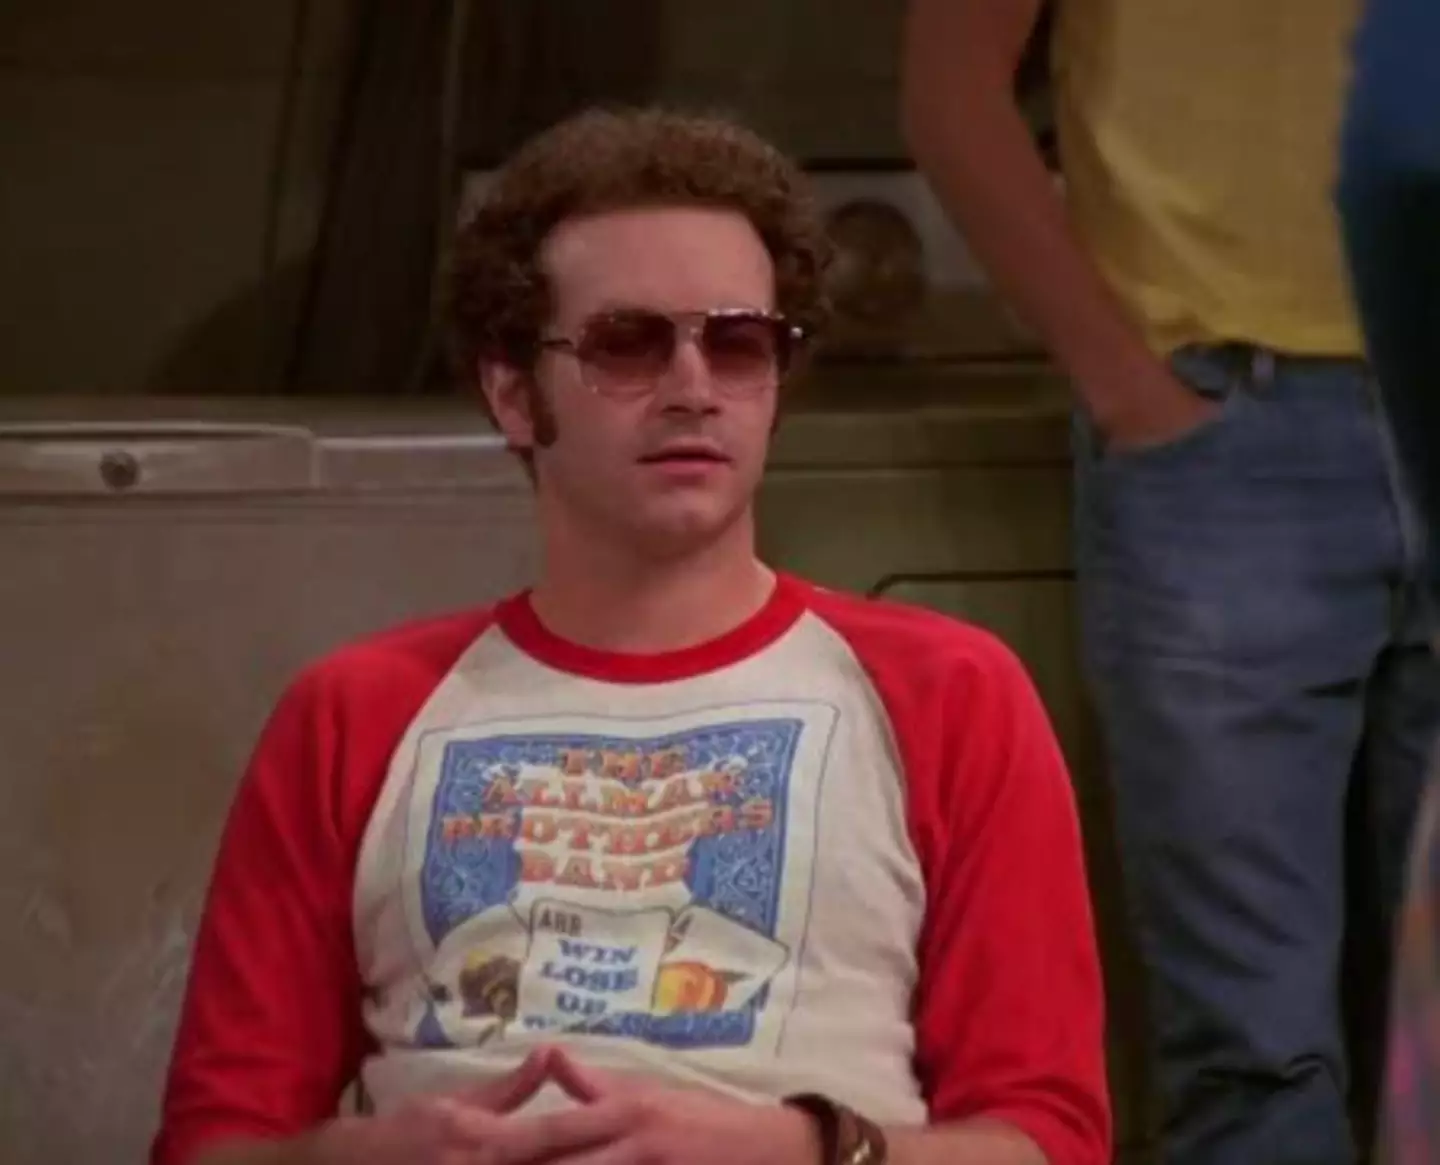 Danny Masterson is best known for his role as Hyde in That '70s Show.